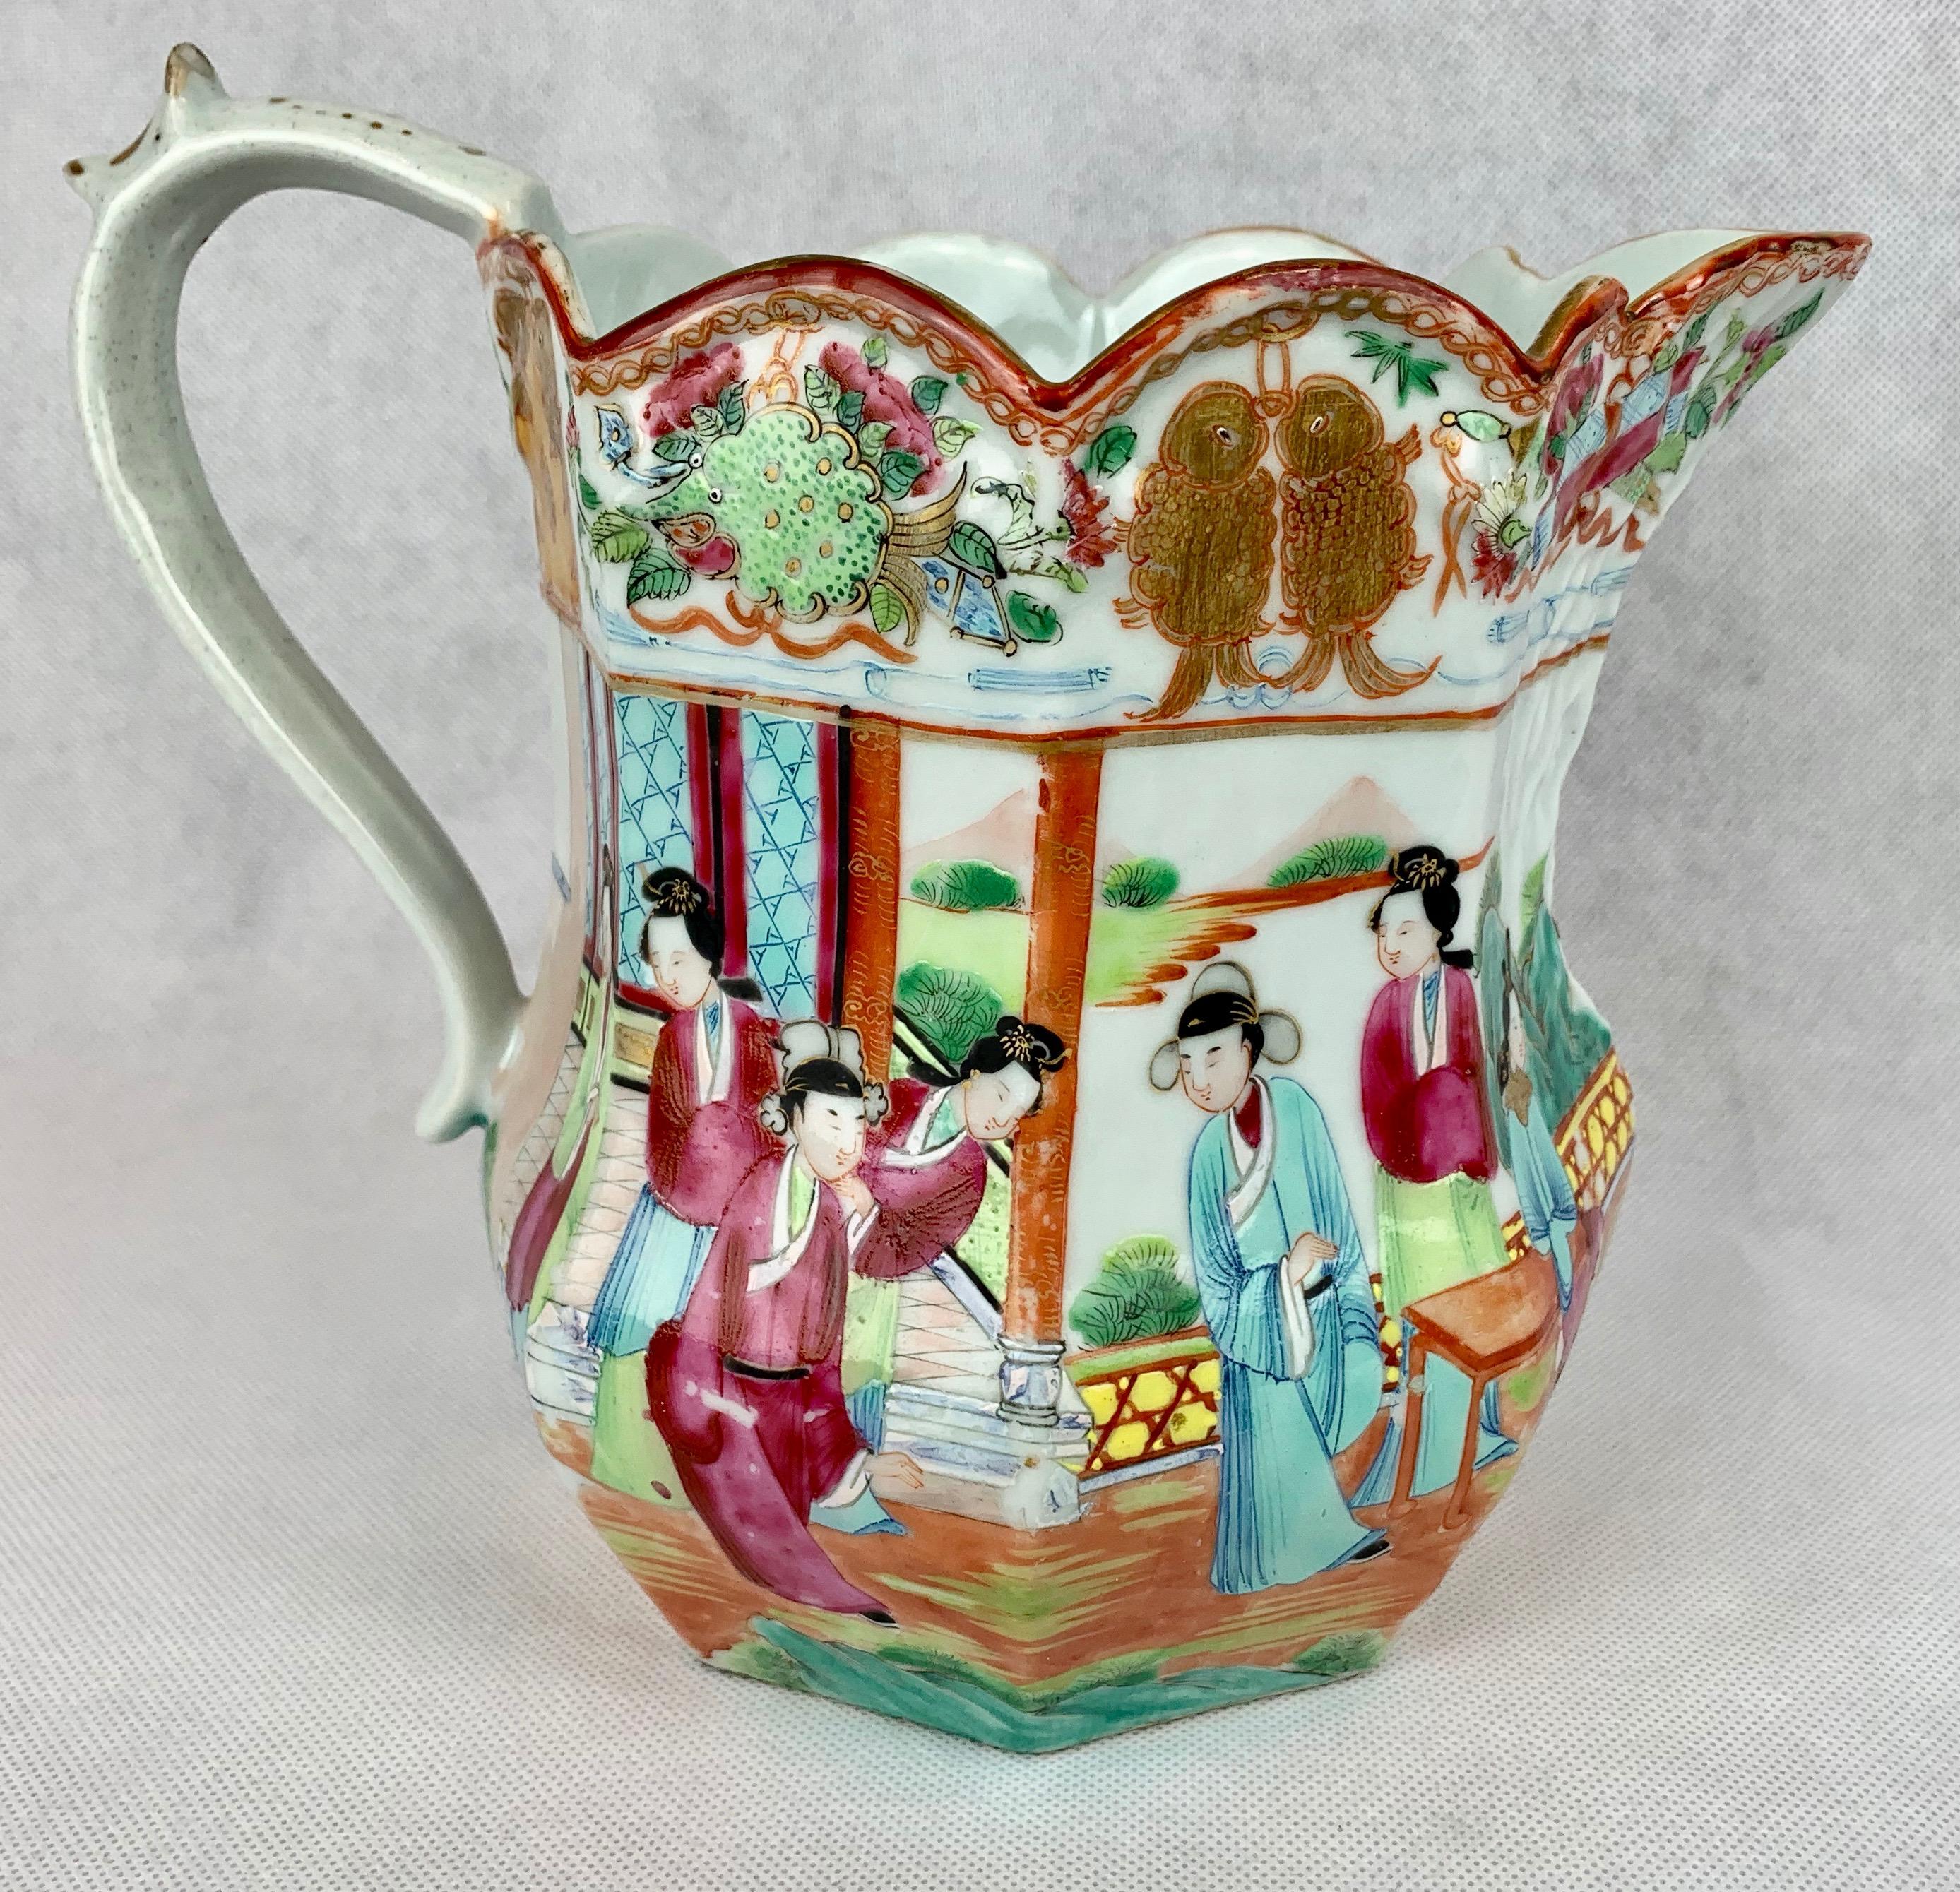 Large Chinese export porcelain pitcher in the mandarin or famille rose pattern. The octagon shaped body is decorated with court scenes and figures. The top is scalloped.
The height is 8.5